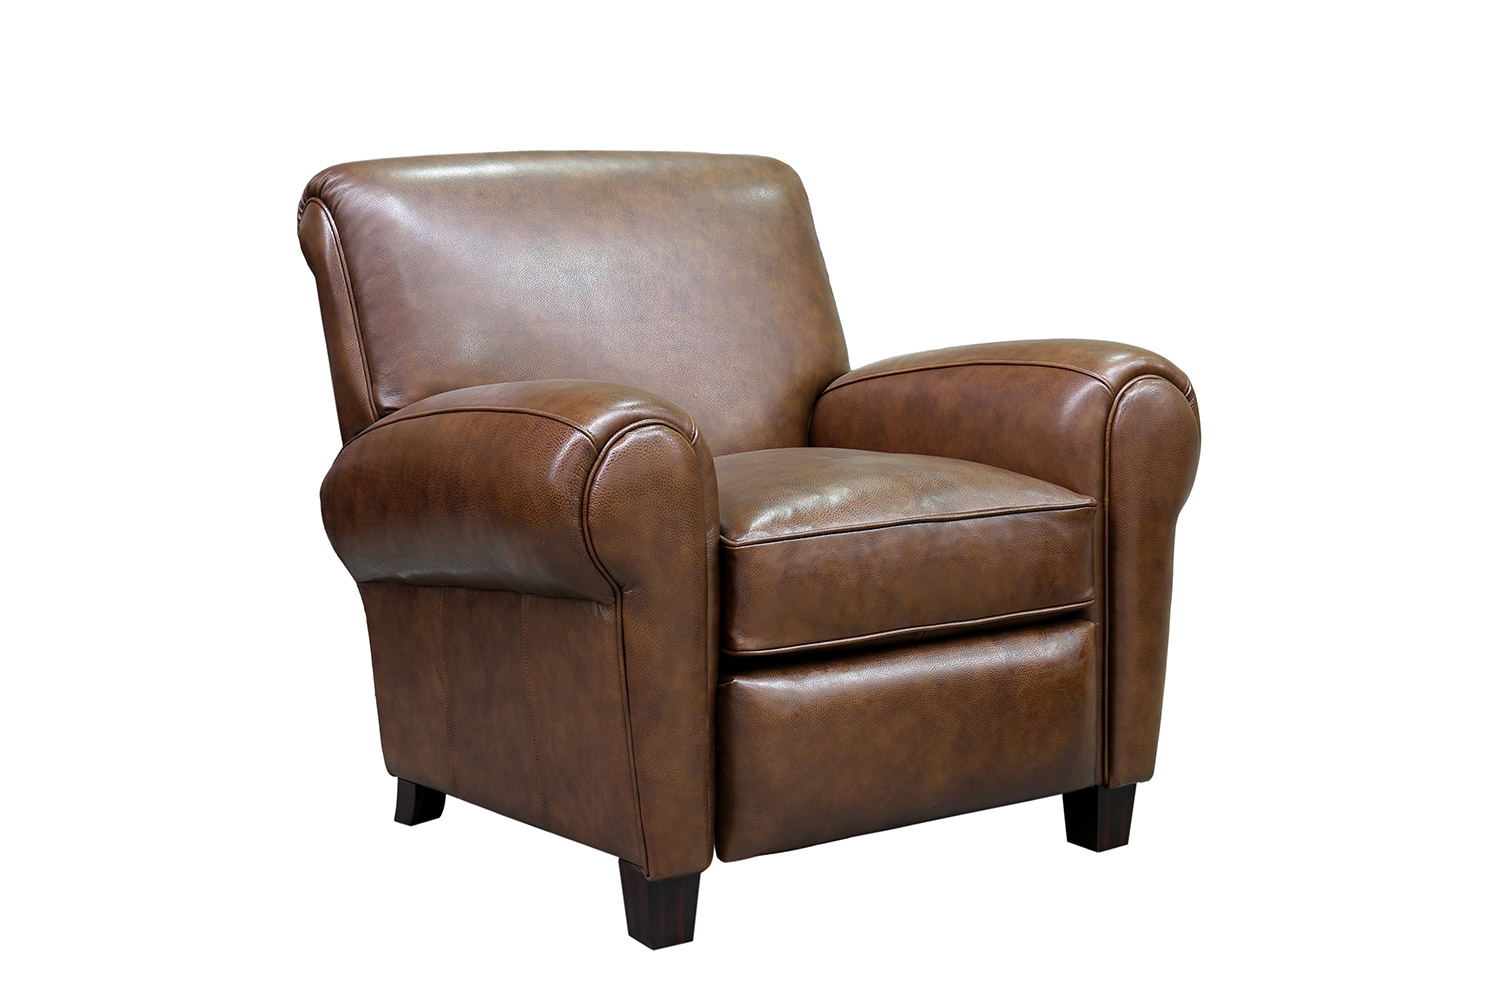 Barcalounger Edwin Recliner Chair - Wenlock Double Chocolate/All Leather